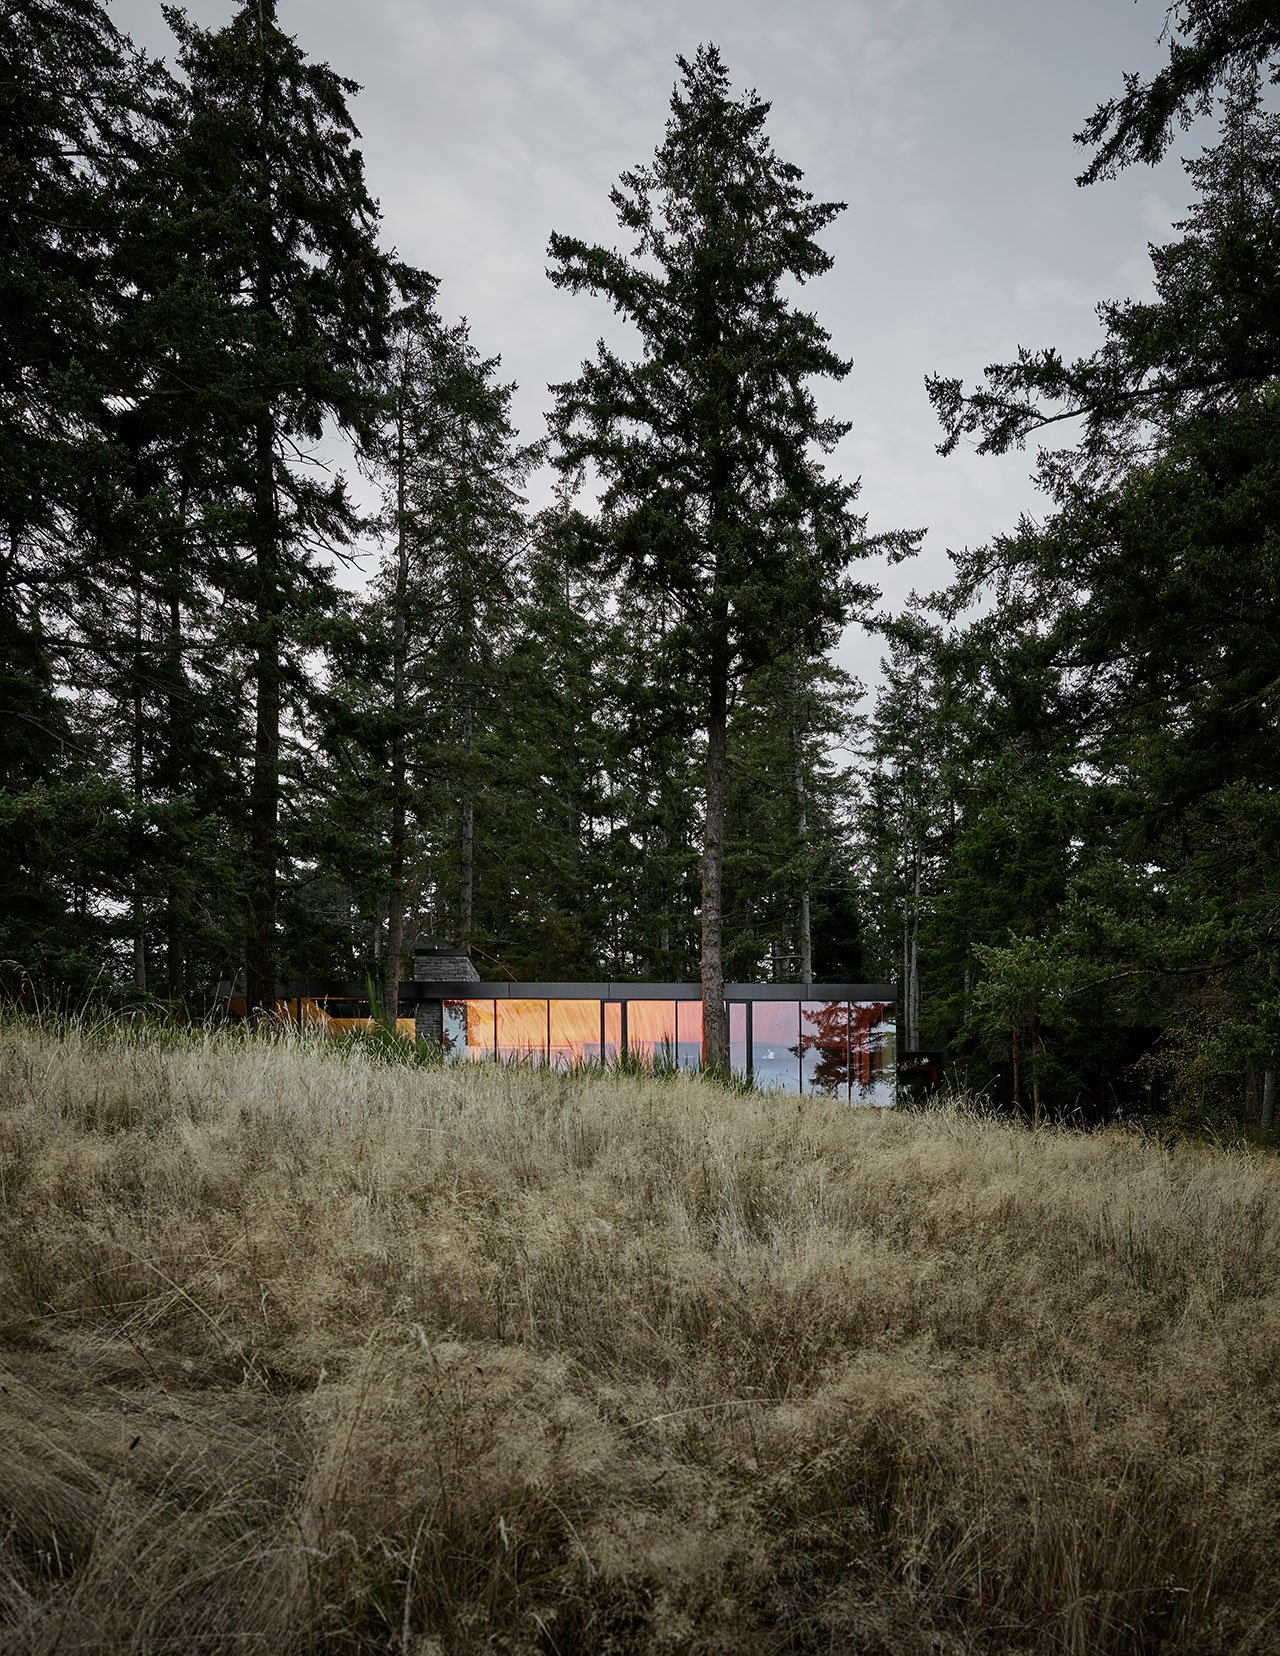 Whidbey Farm by mwworks.
Photo by Kevin Scott.